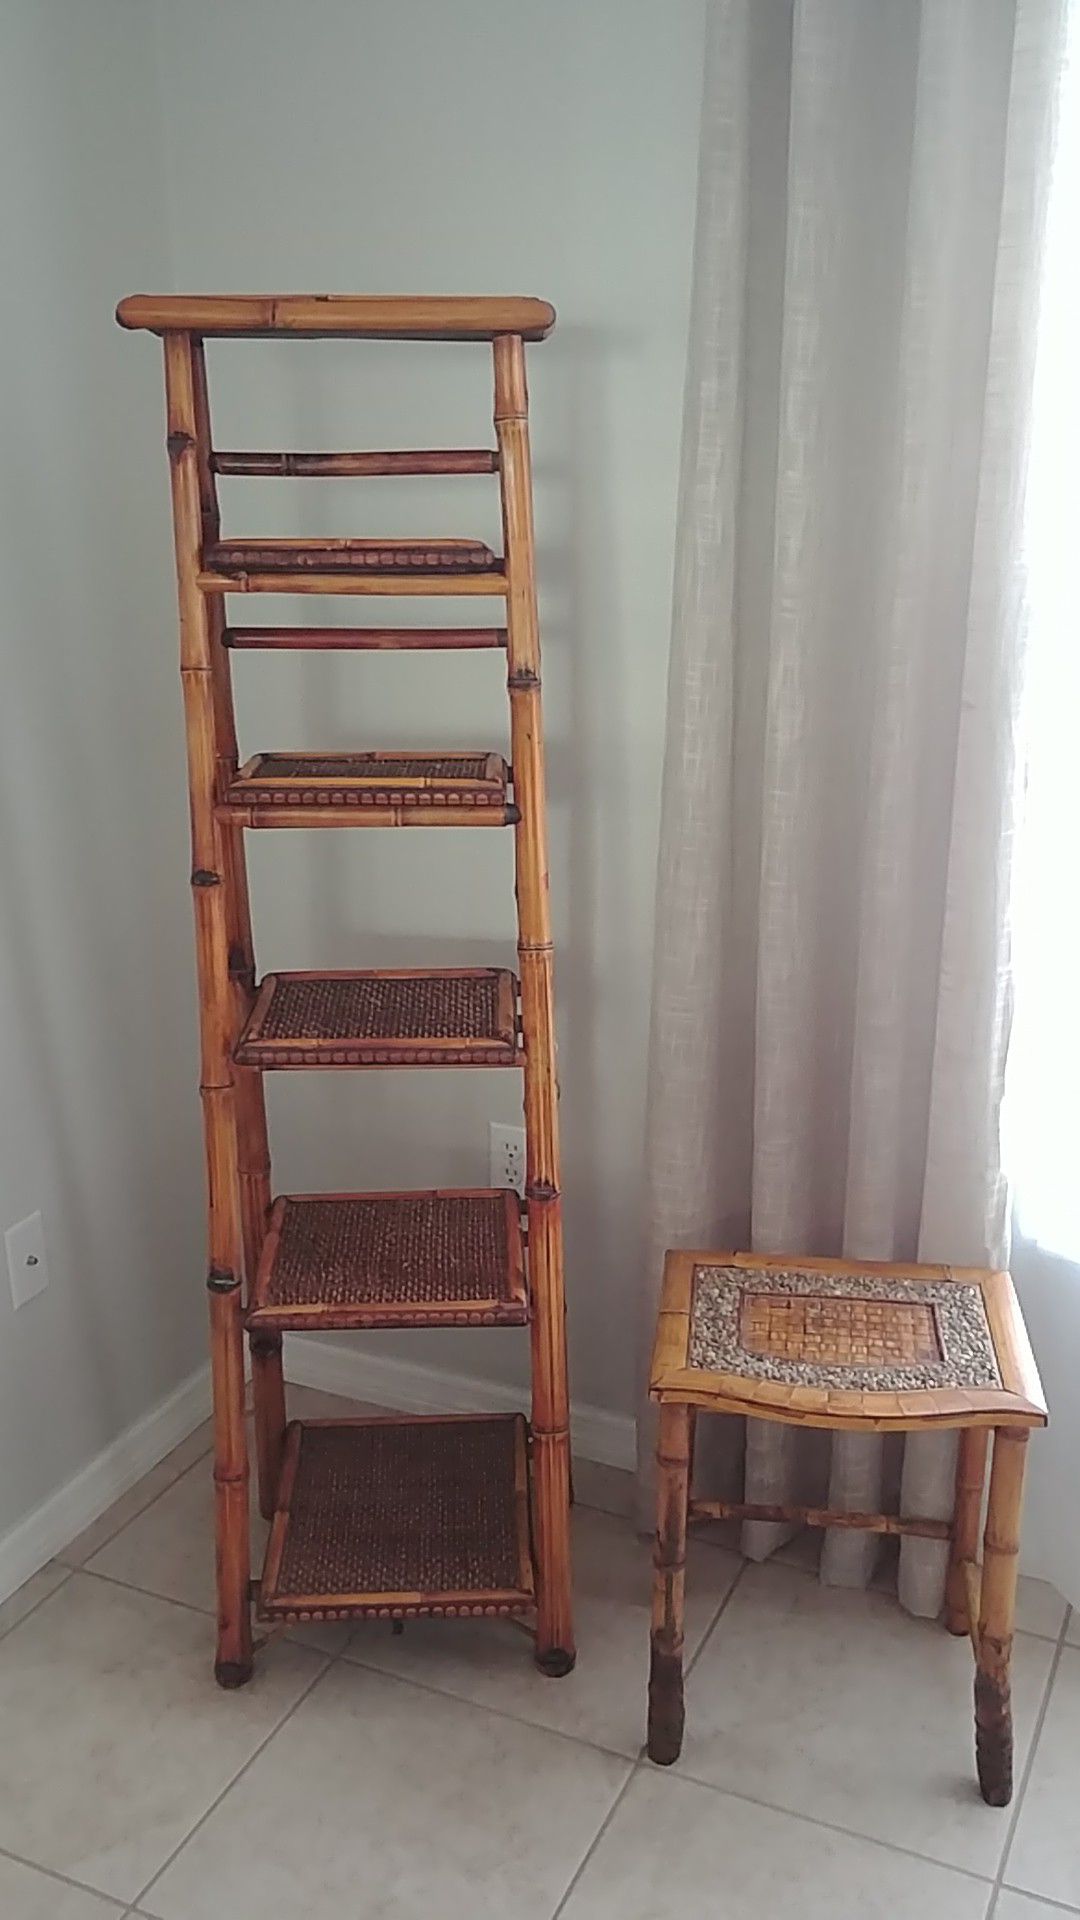 Ladder shelf and side table